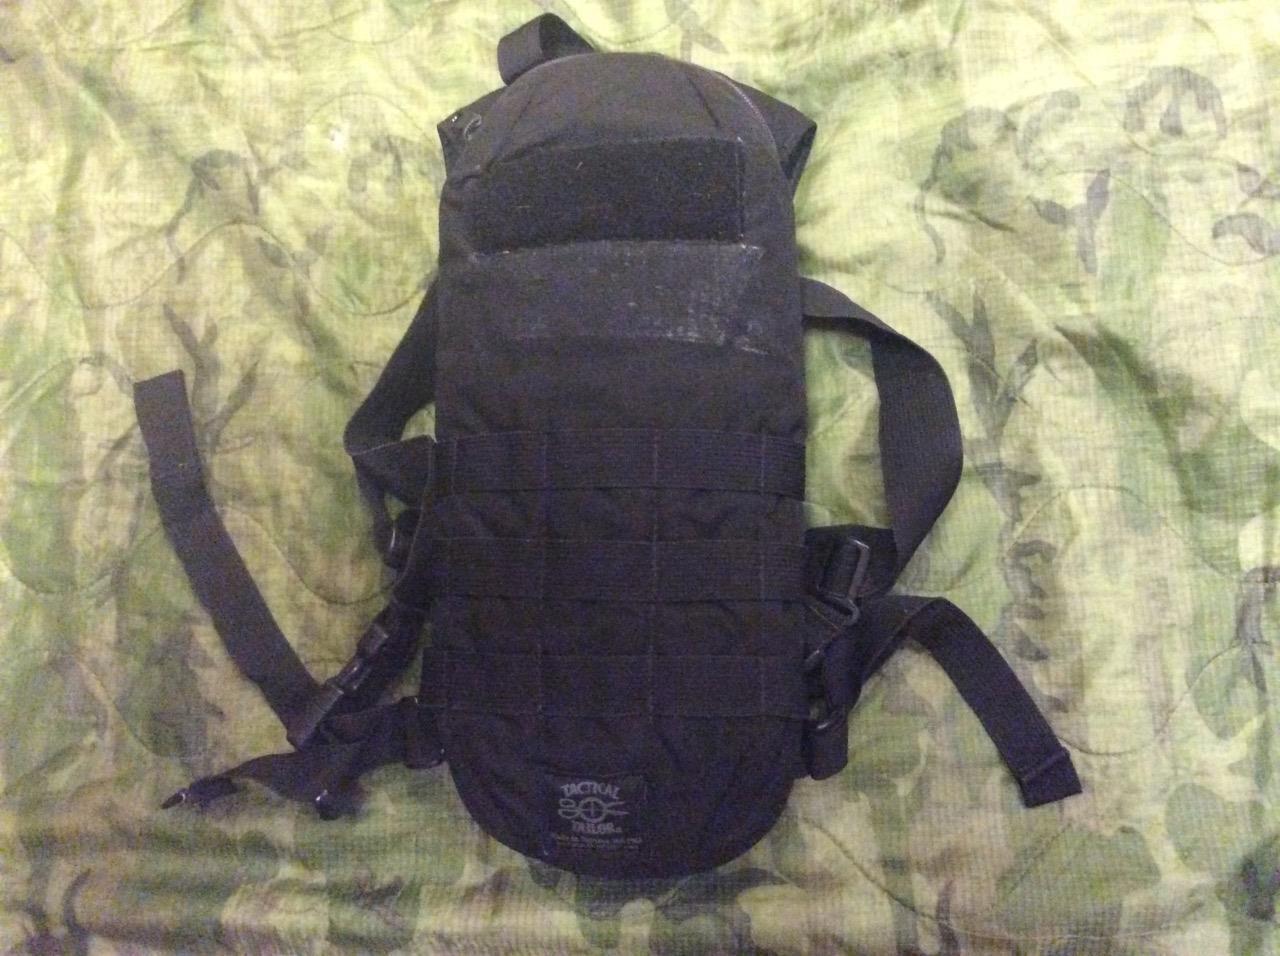 Military Surplus SEAL USMC MARSOC Tactical Tailor Hydration Pouch Backpack Black